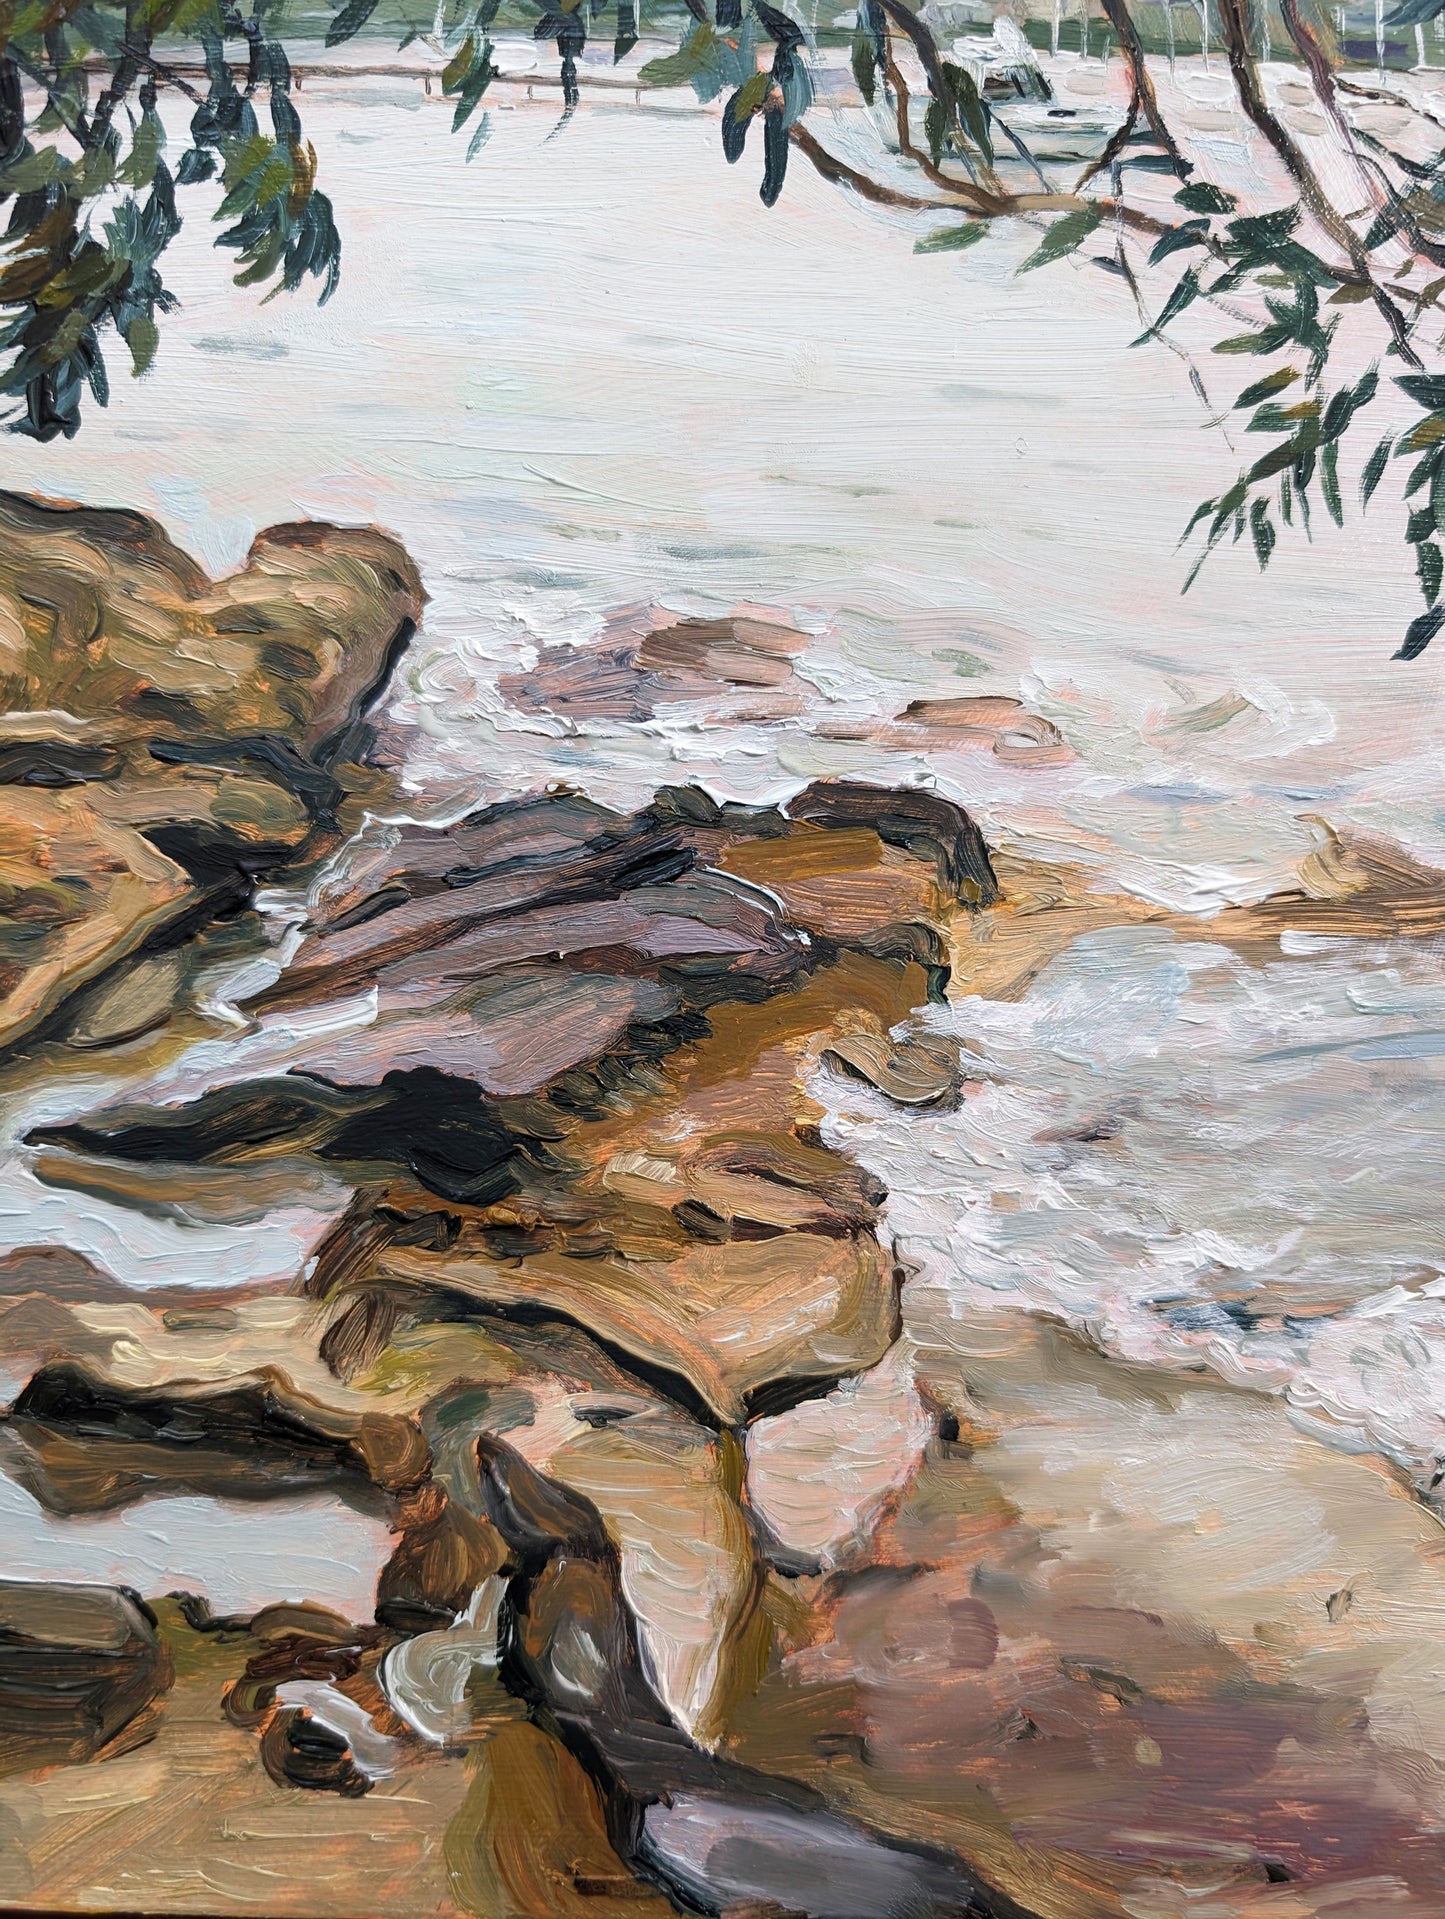 Forty Baskets Beach, Manly Cove | Original Painting Original Paintings Harriet Lawless Artist australia